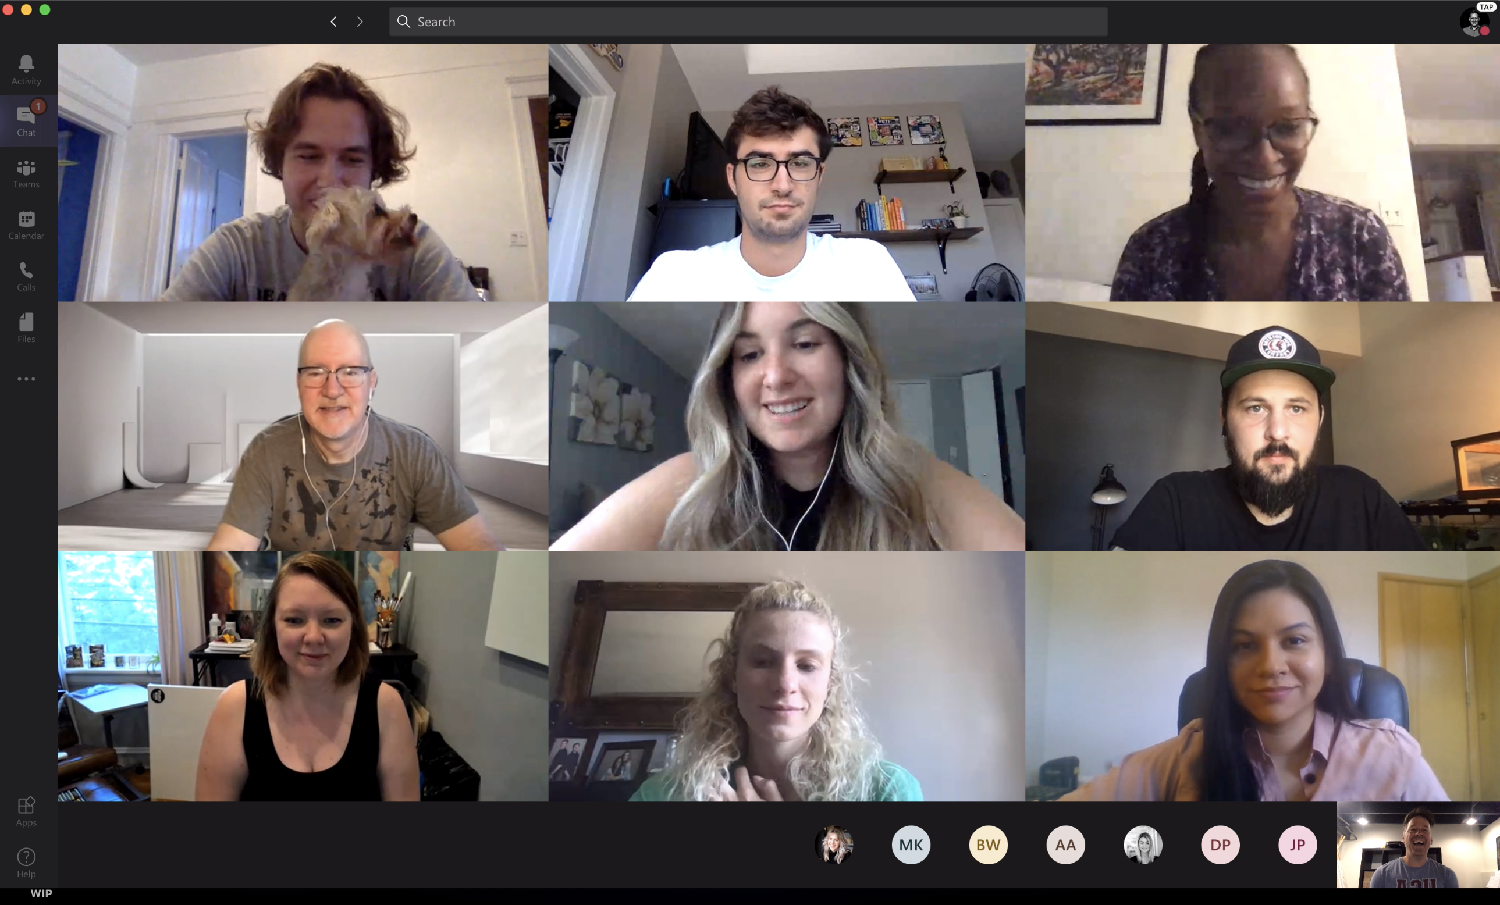 The newest way of working at The Marketing Store: daily video calls with the team!